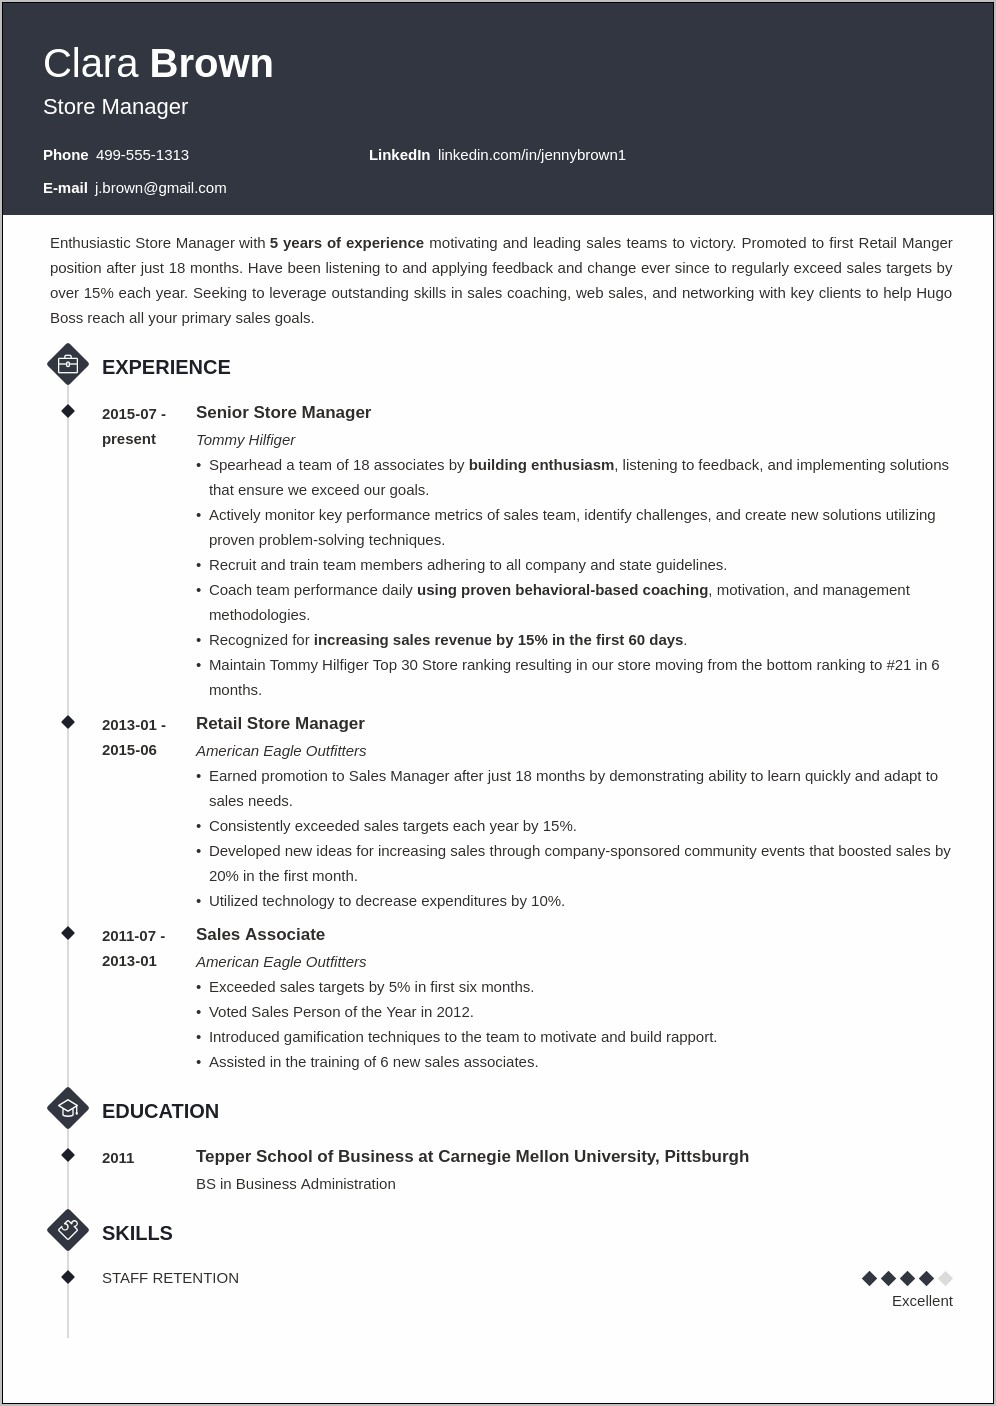 Resume Objective Examples Retail Stores